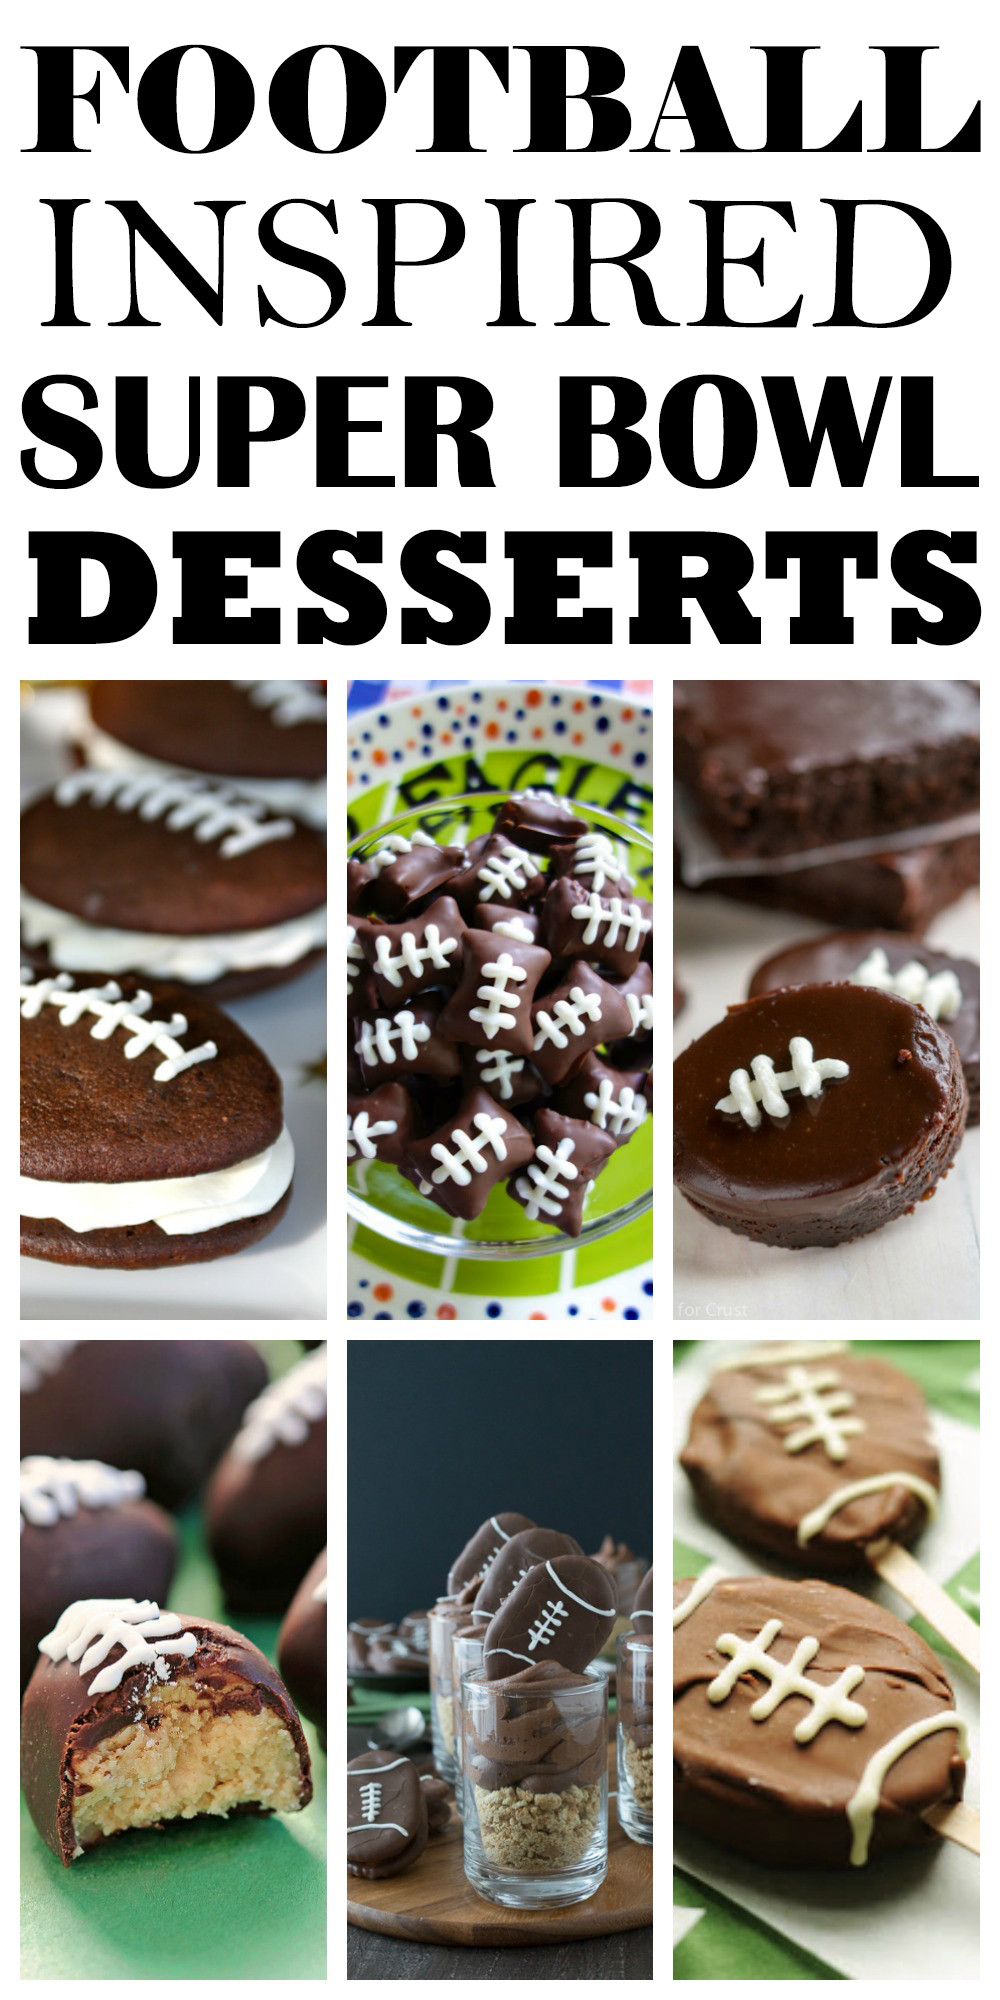 Desserts For Super Bowl Party
 Top Draft Pick Super Bowl Party Desserts THE BLOG DORY FITZ